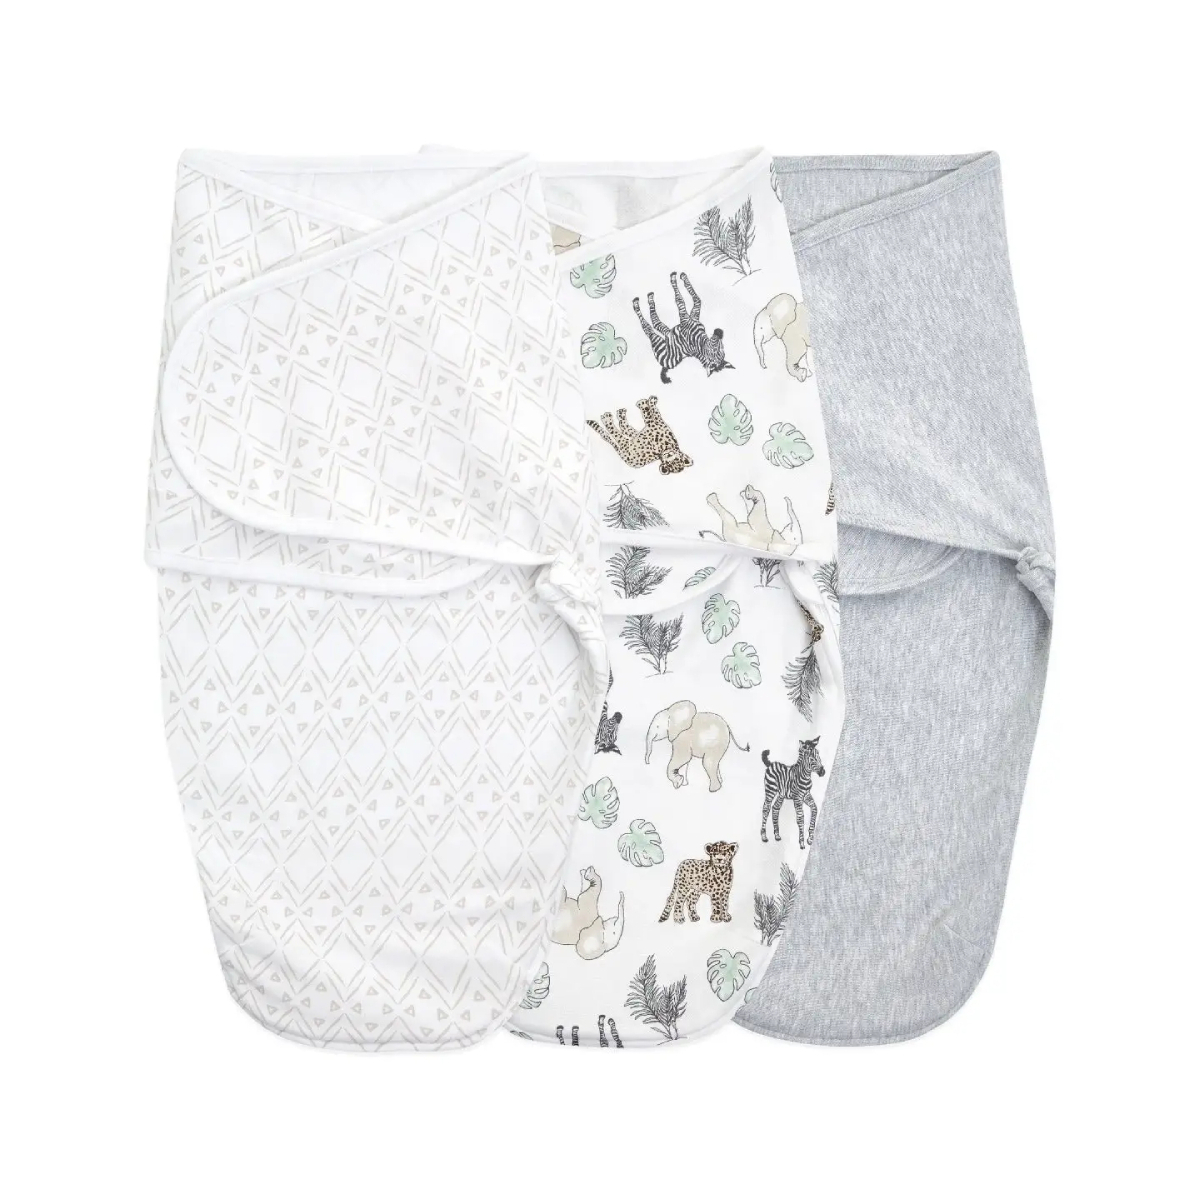 Image of Aden + Anais Pack of 3 Essential Easy Swaddle Wrap 1.0 TOG 4-6 Months - Toile (23-19-390)